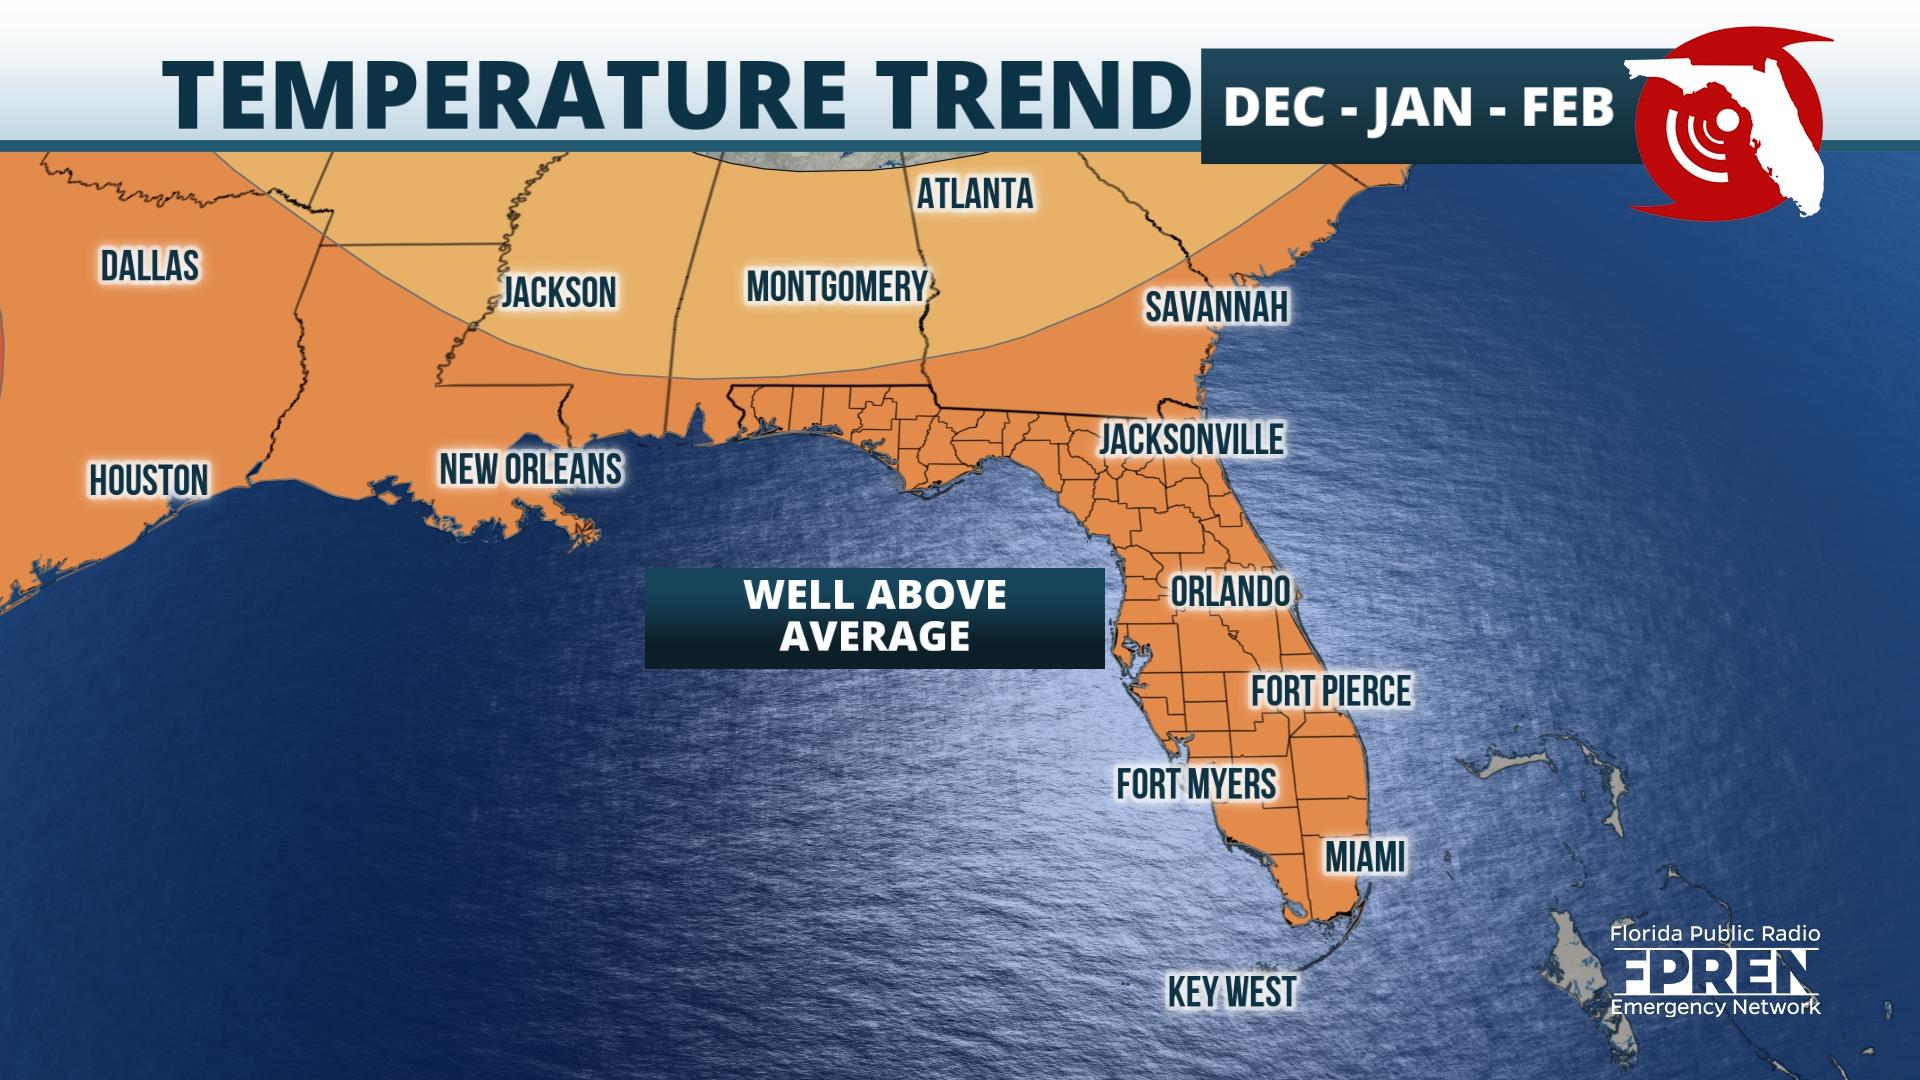 Featured image for “Warmer, drier winter predicted for Florida”